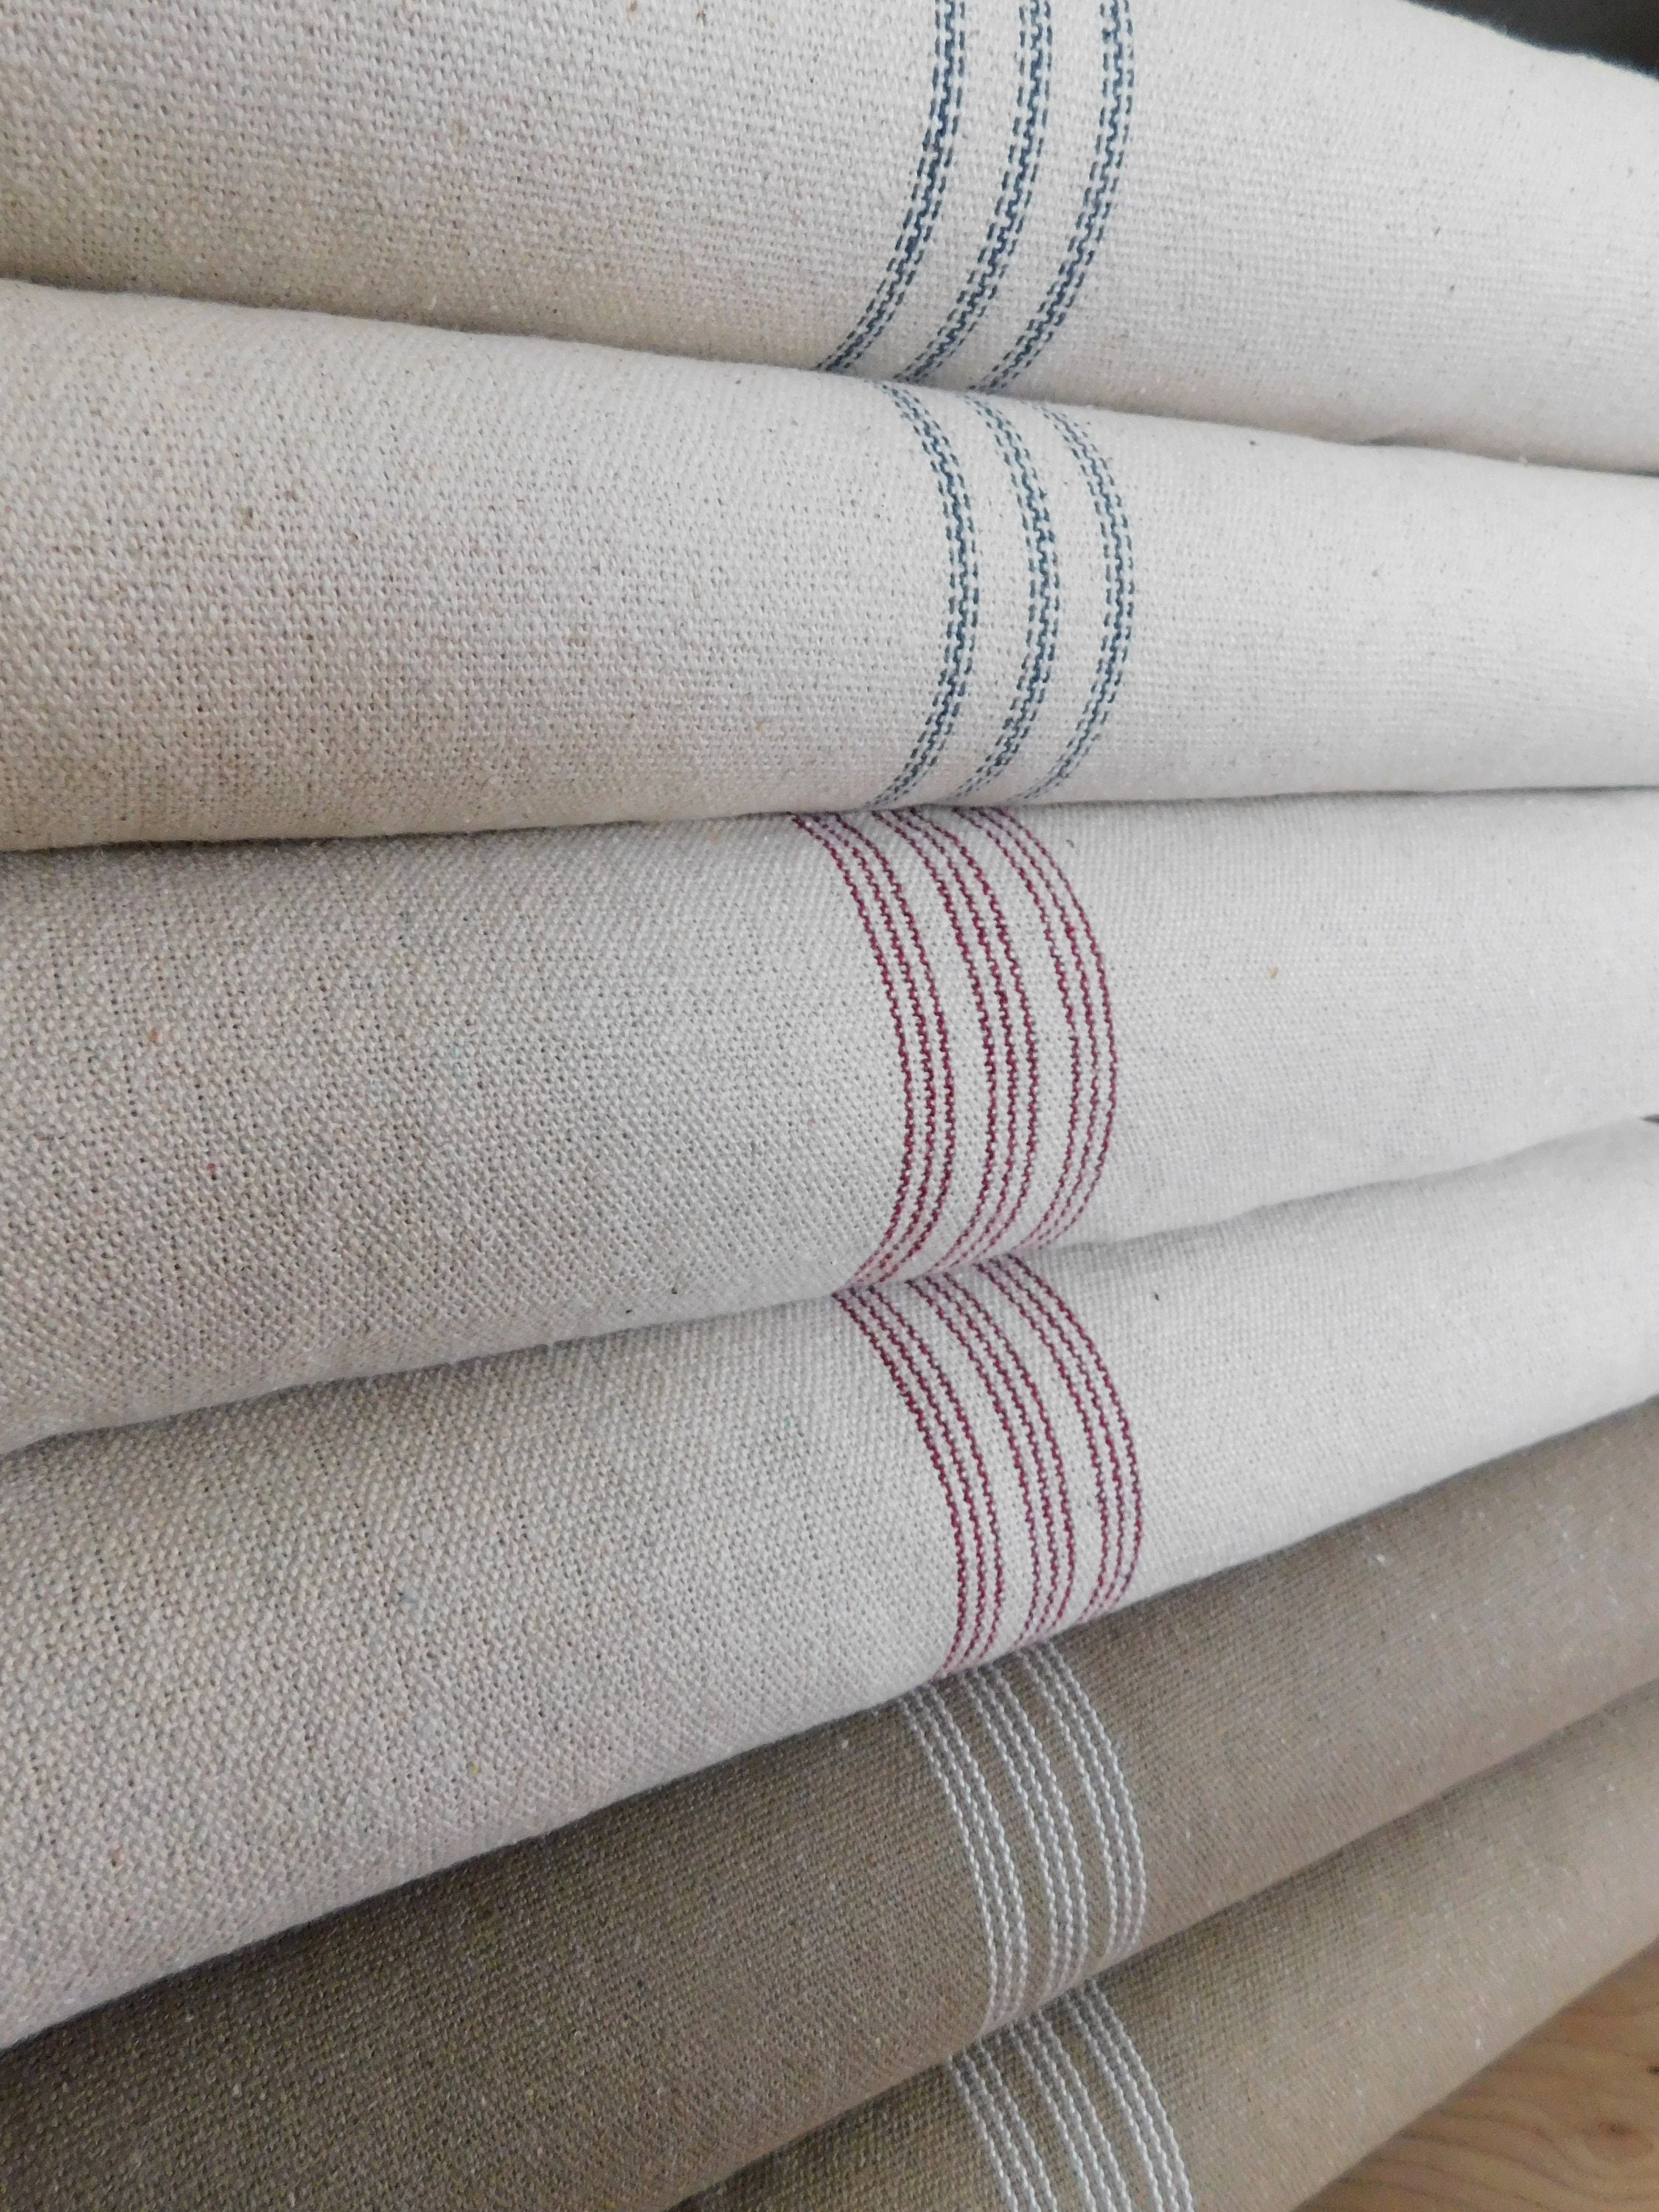 Farmhouse Fabric by the Yard Grain Sack Fabric Ticking Fabric 9 Stripe  Fabric 54 Wide Upholstery Weight CONTINUOUS PIECE 